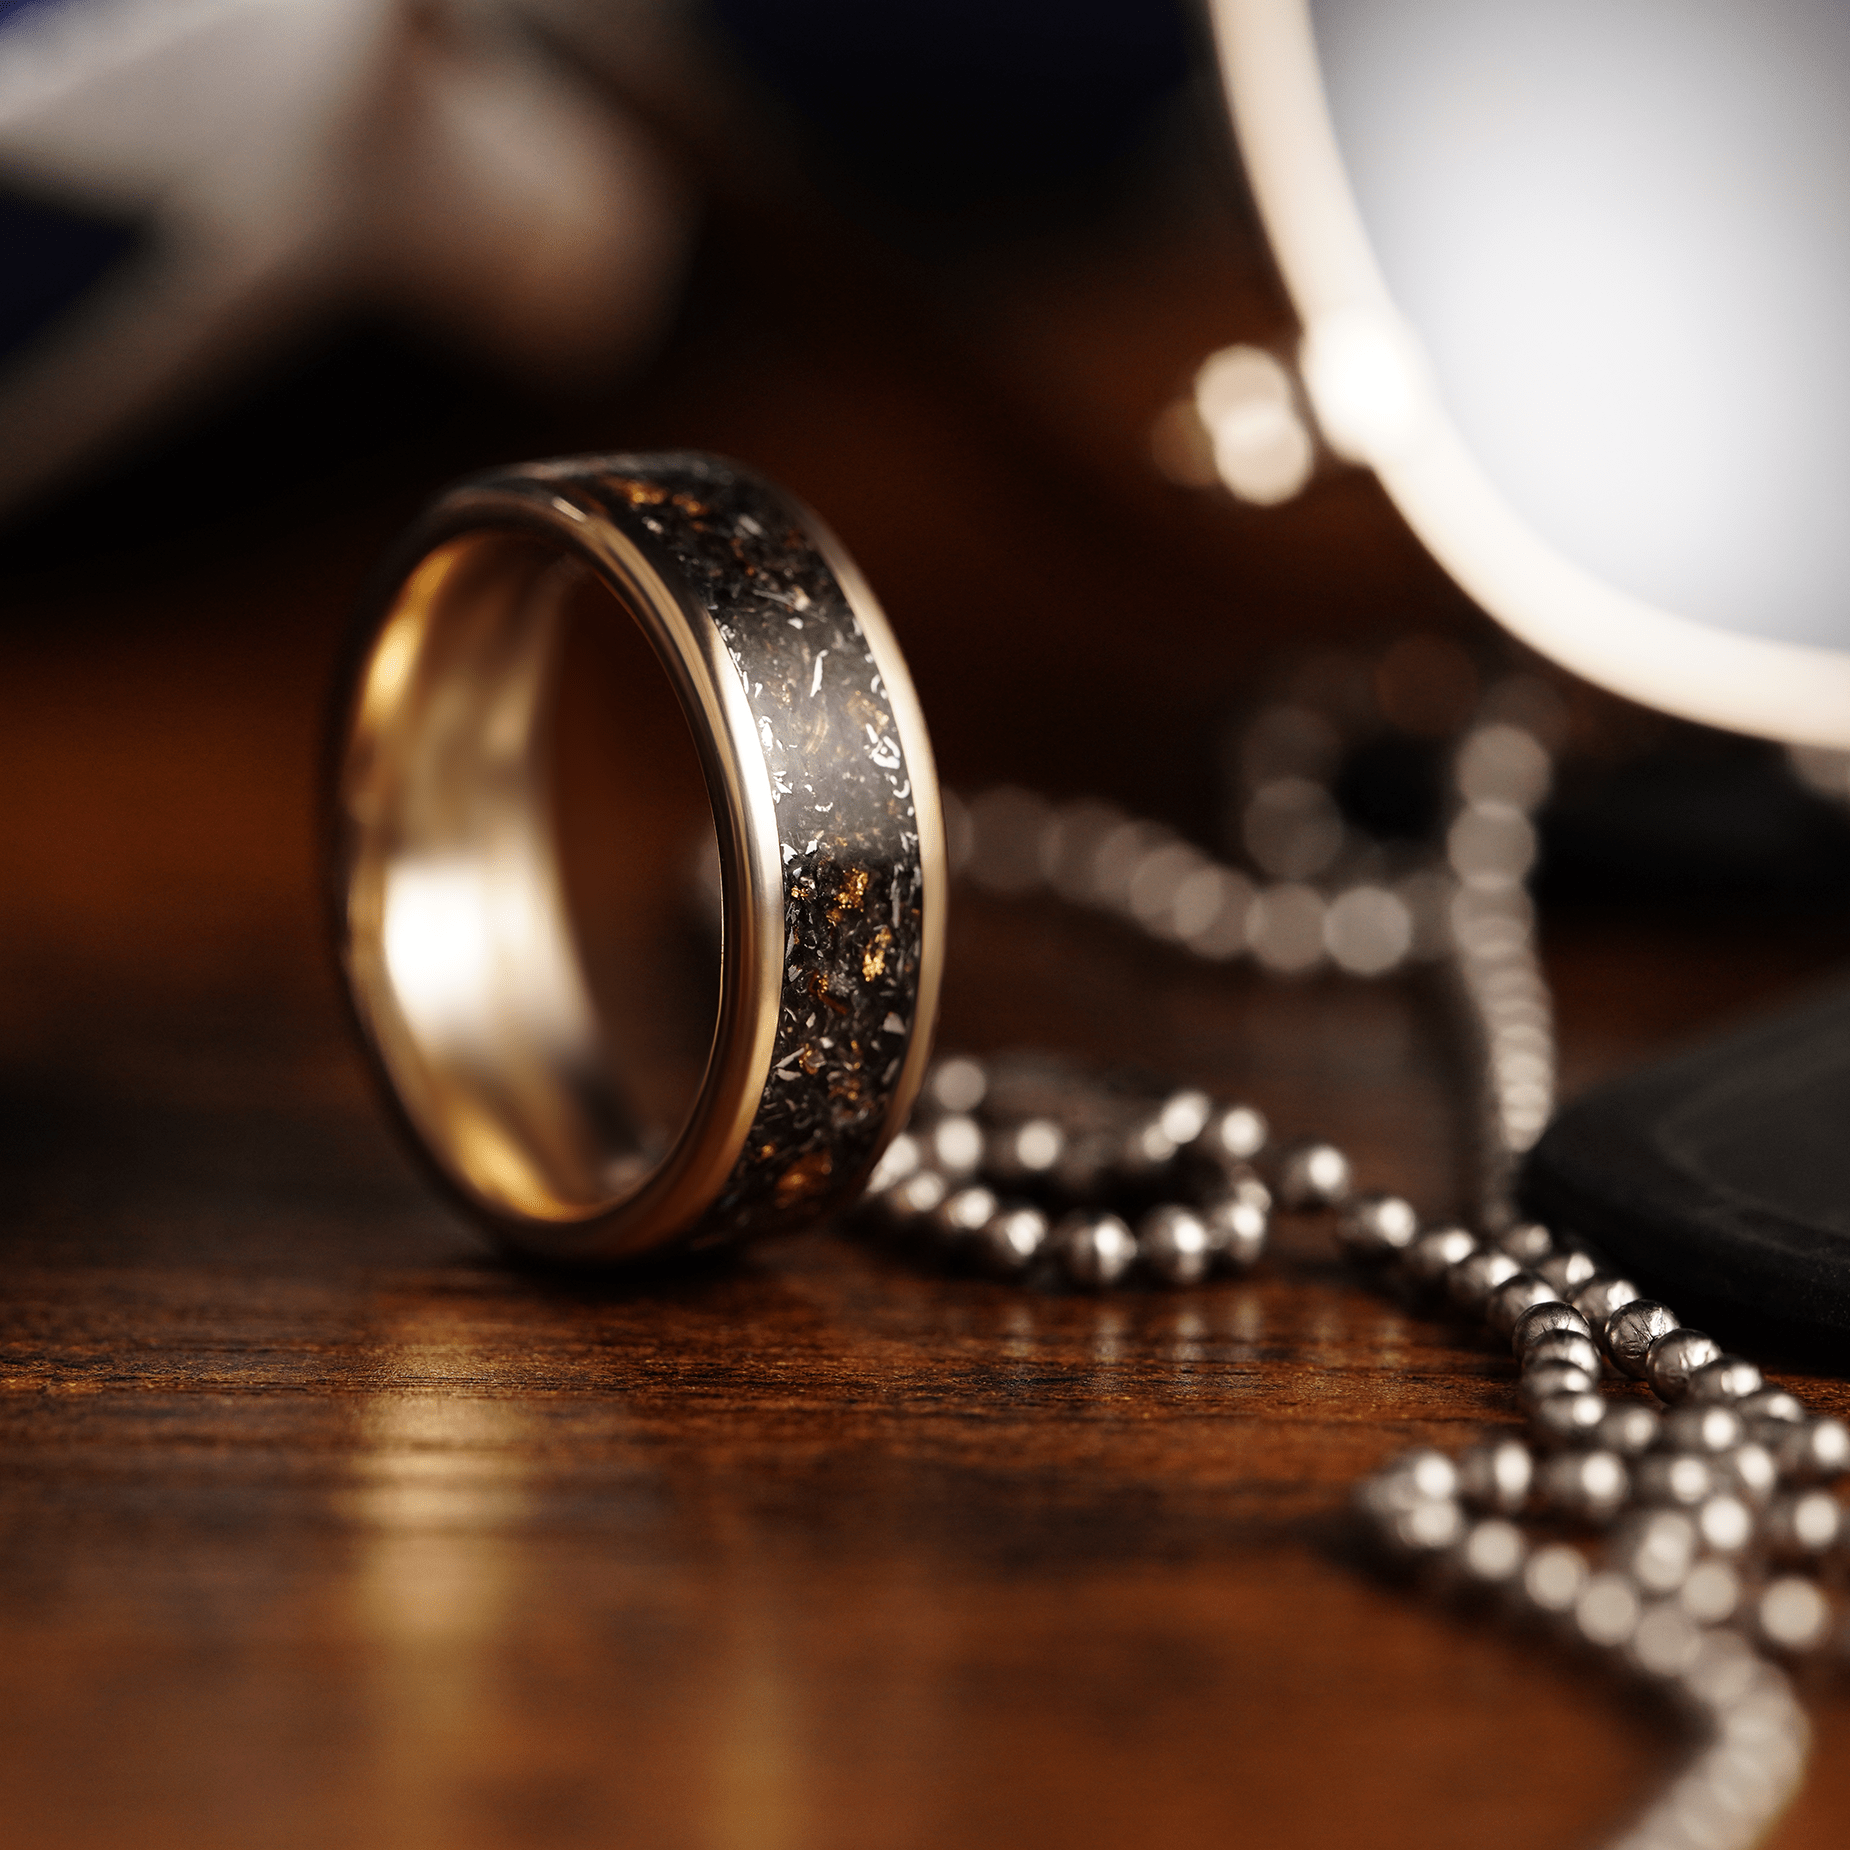 The Admiral - Men's Wedding Rings - Manly Bands